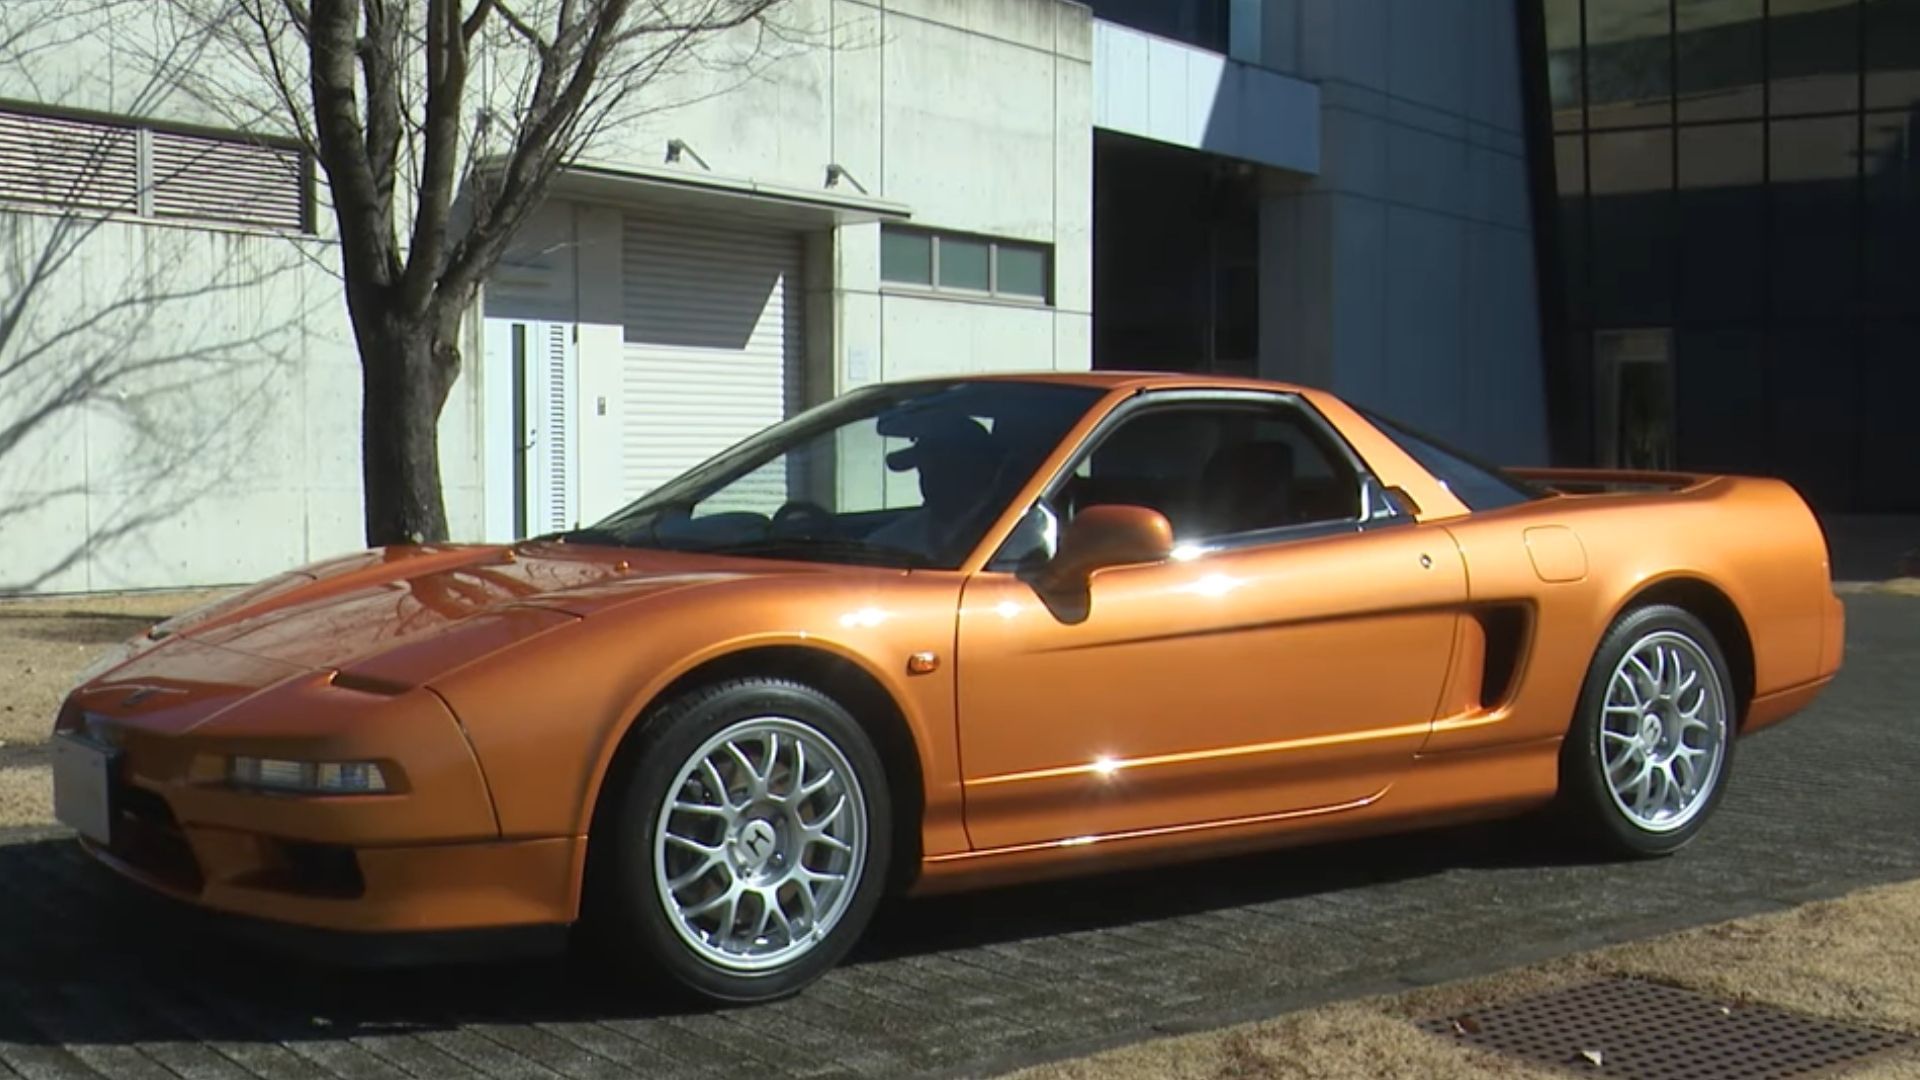 The Honda Nsx Type S Is A Bona Fide 90s Collectible